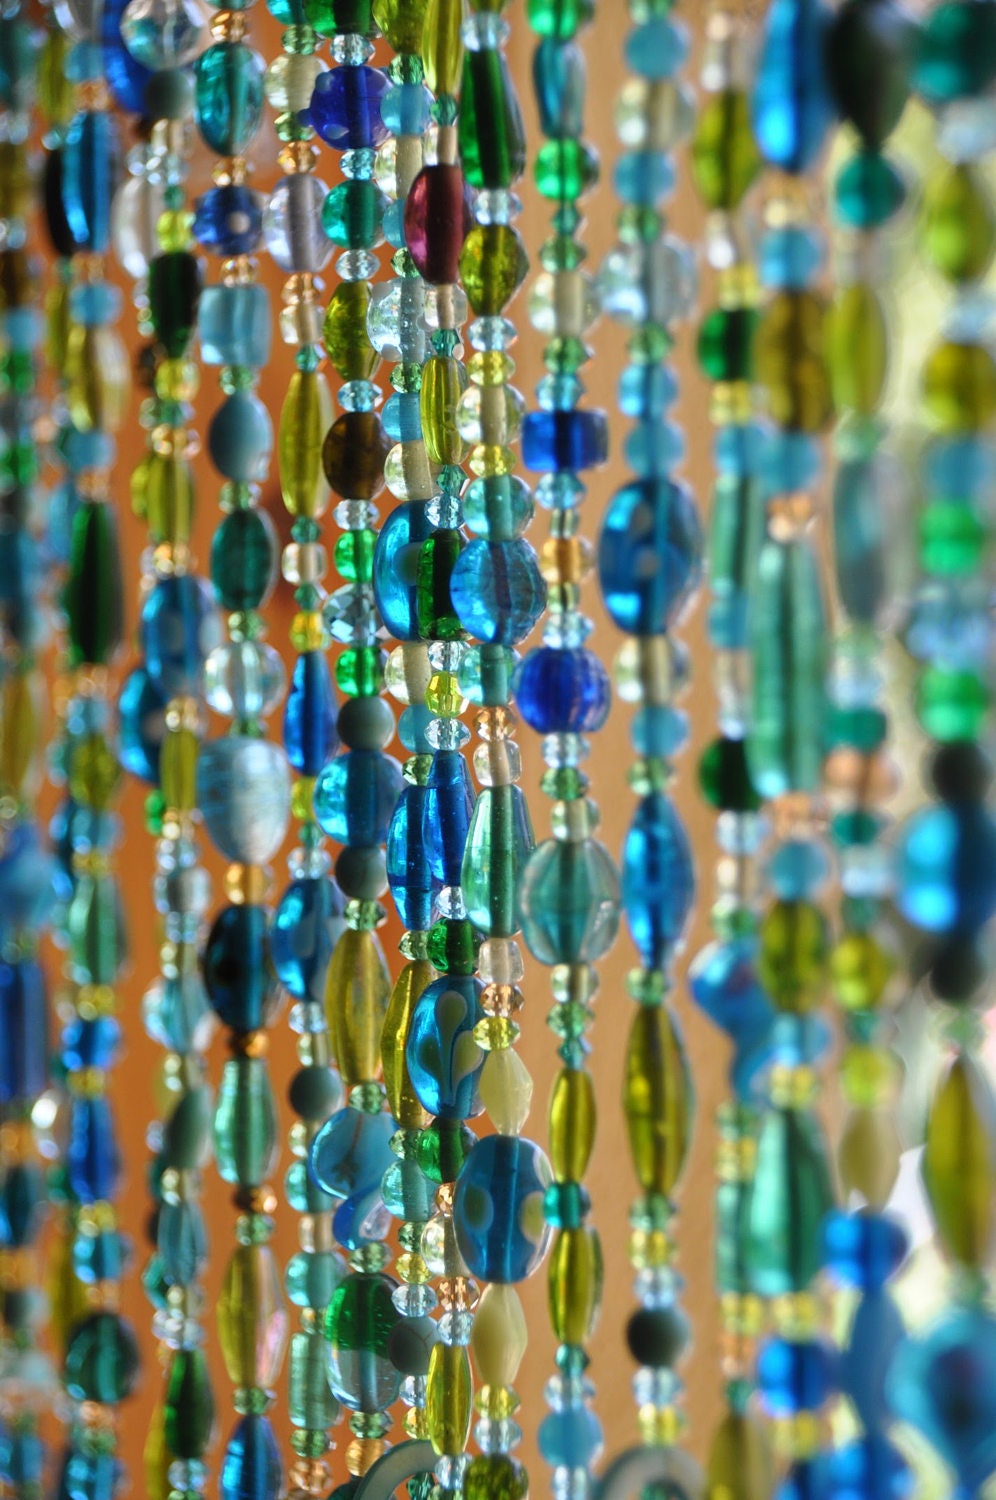 Beaded Curtains In shadows of Blue Turquoise green & transparent